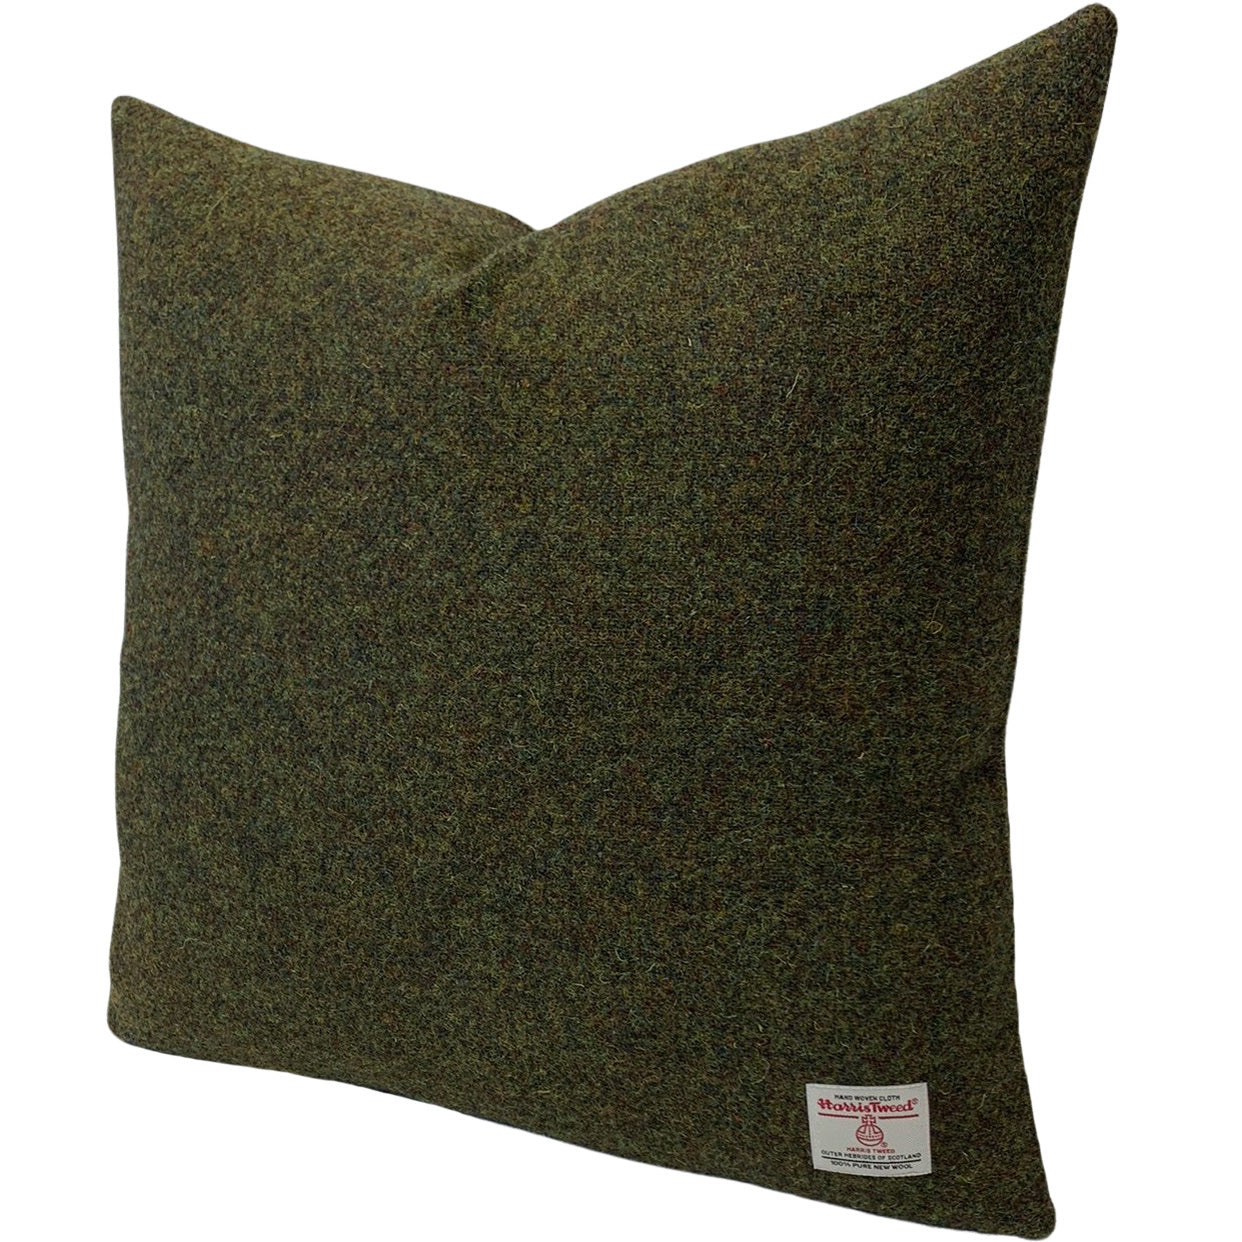 Harris Tweed Moss Green Cushion with Feather Filled Insert